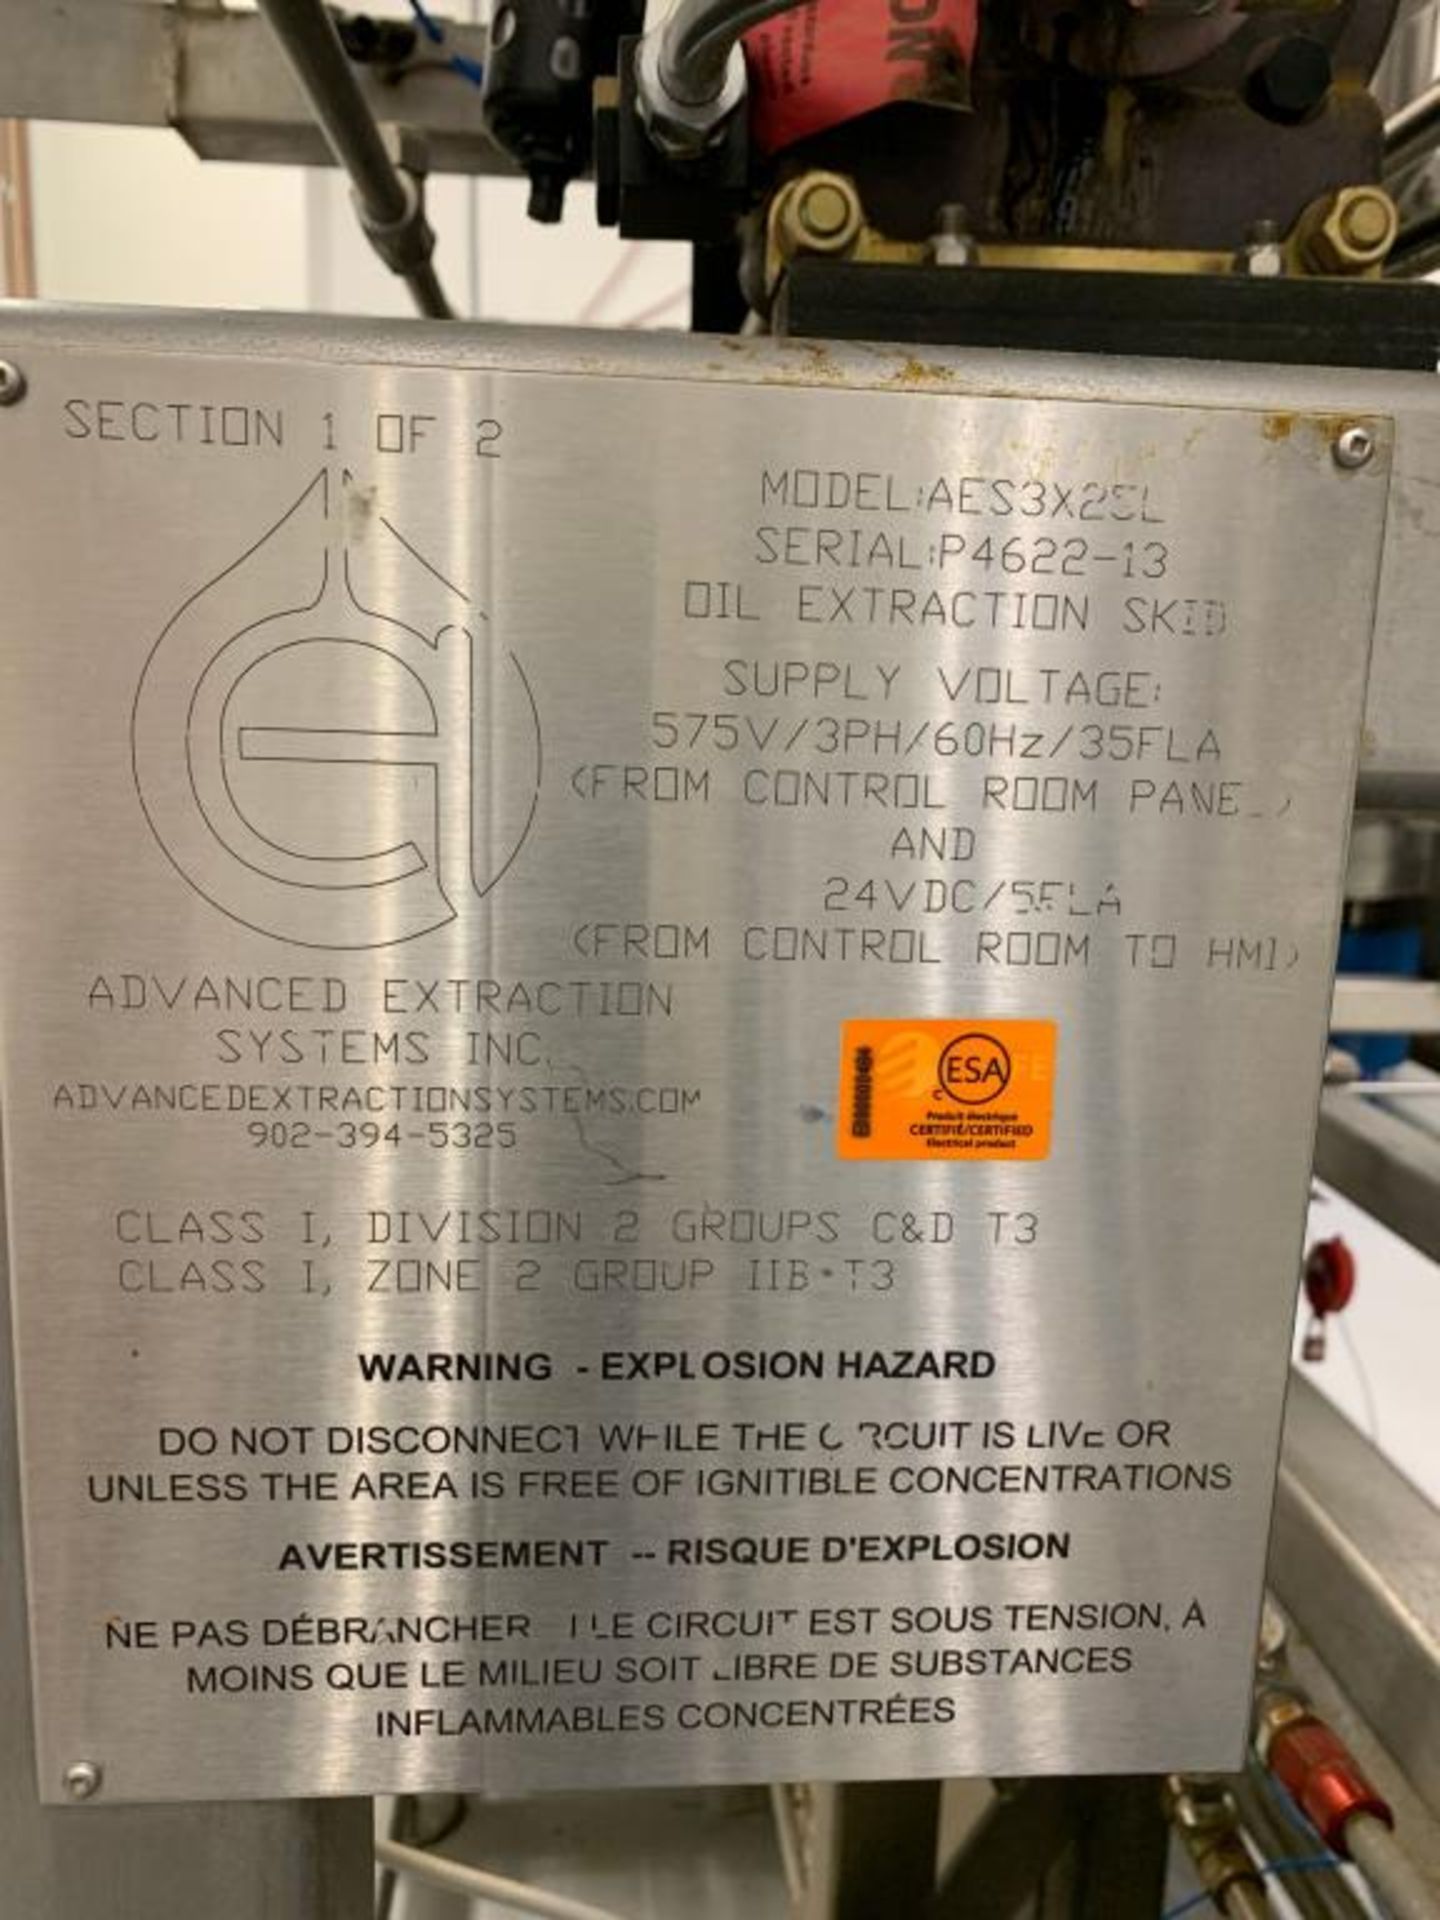 Used Advanced Extraction Systems AES3X25L CO2 Extraction Unit - Bild 8 aus 8